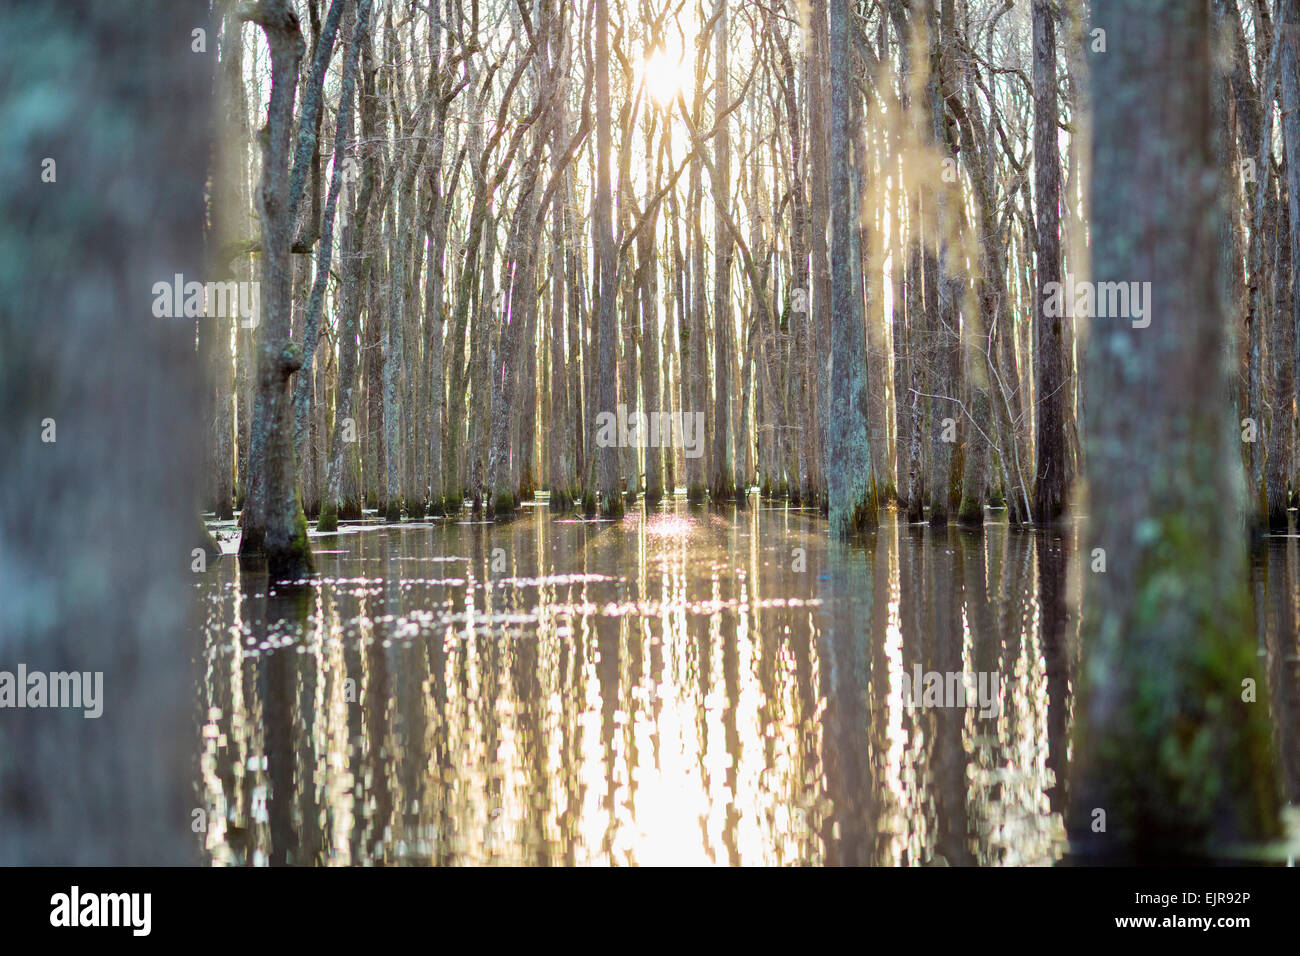 Bare trees in swamp reflecting in still water Stock Photo